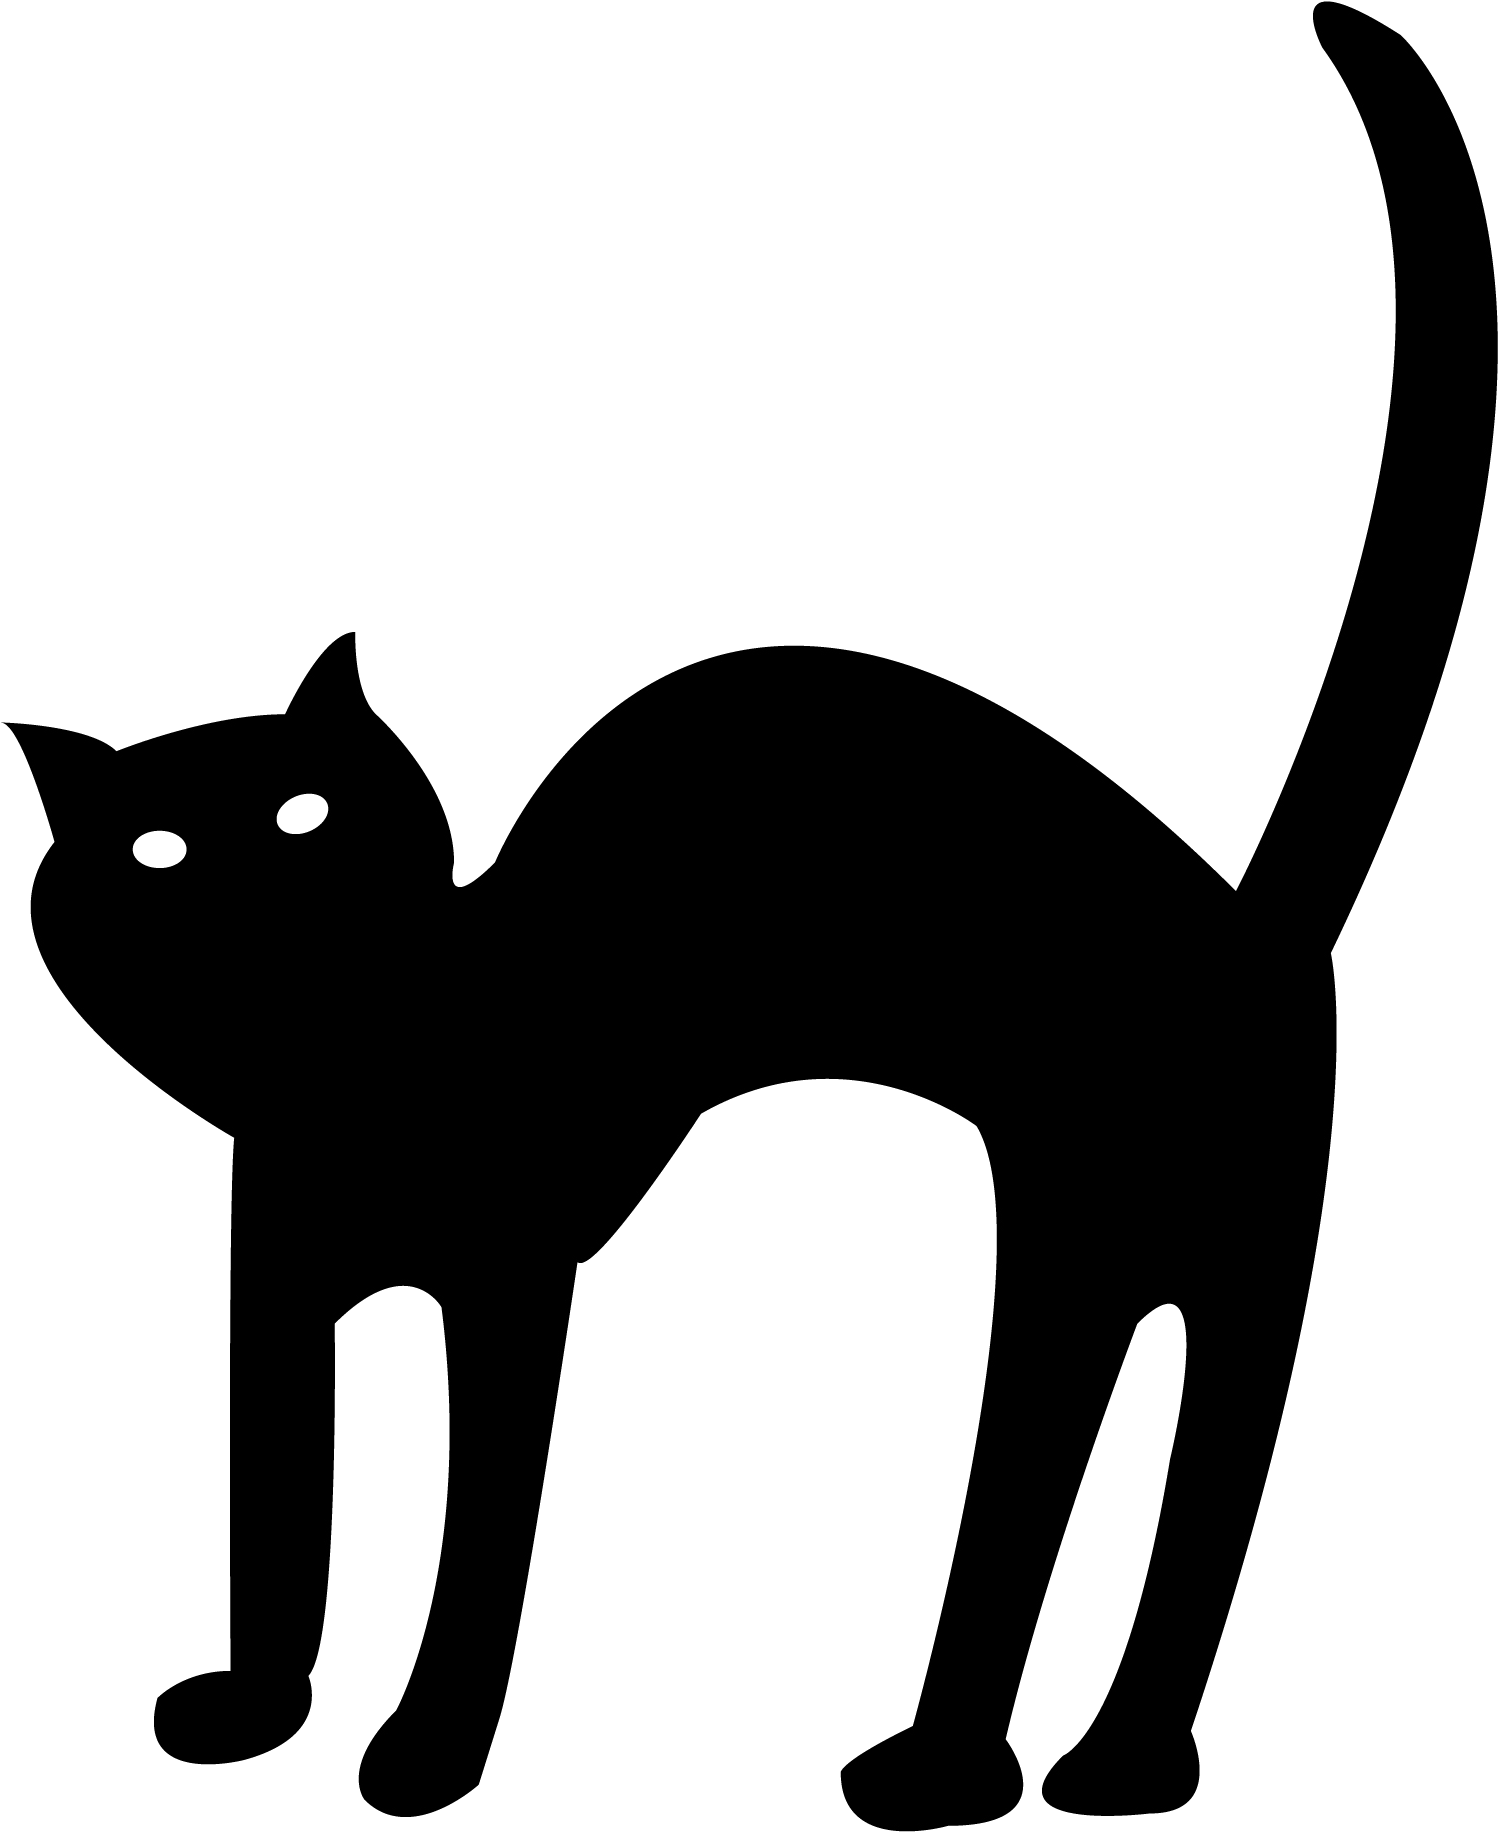 Black Cat Silhouette Graphic PNG image